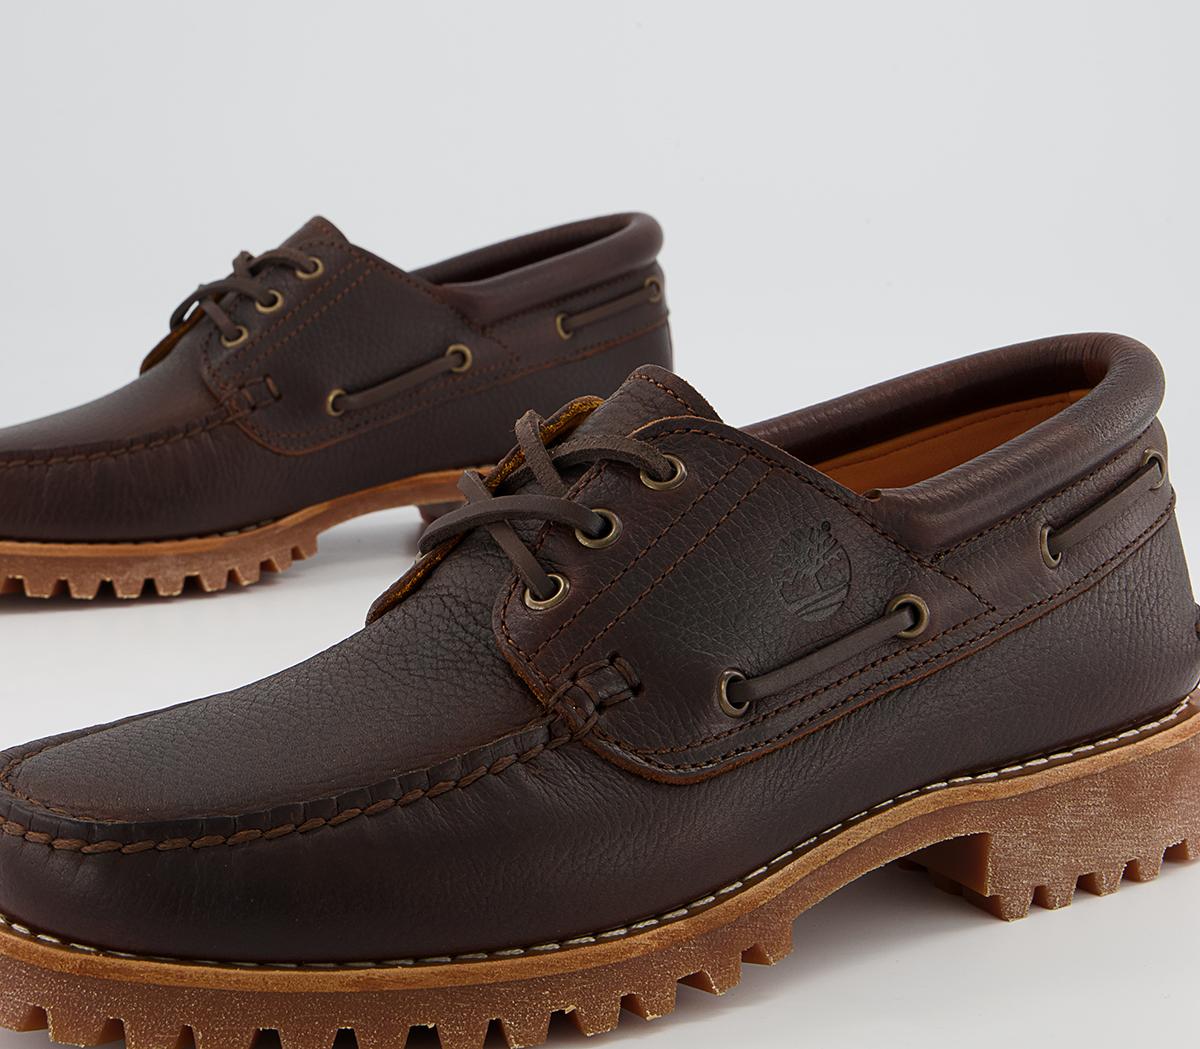 Timberland Authentic 3 Eye Boat Shoes Dark Brown - Boat Shoes